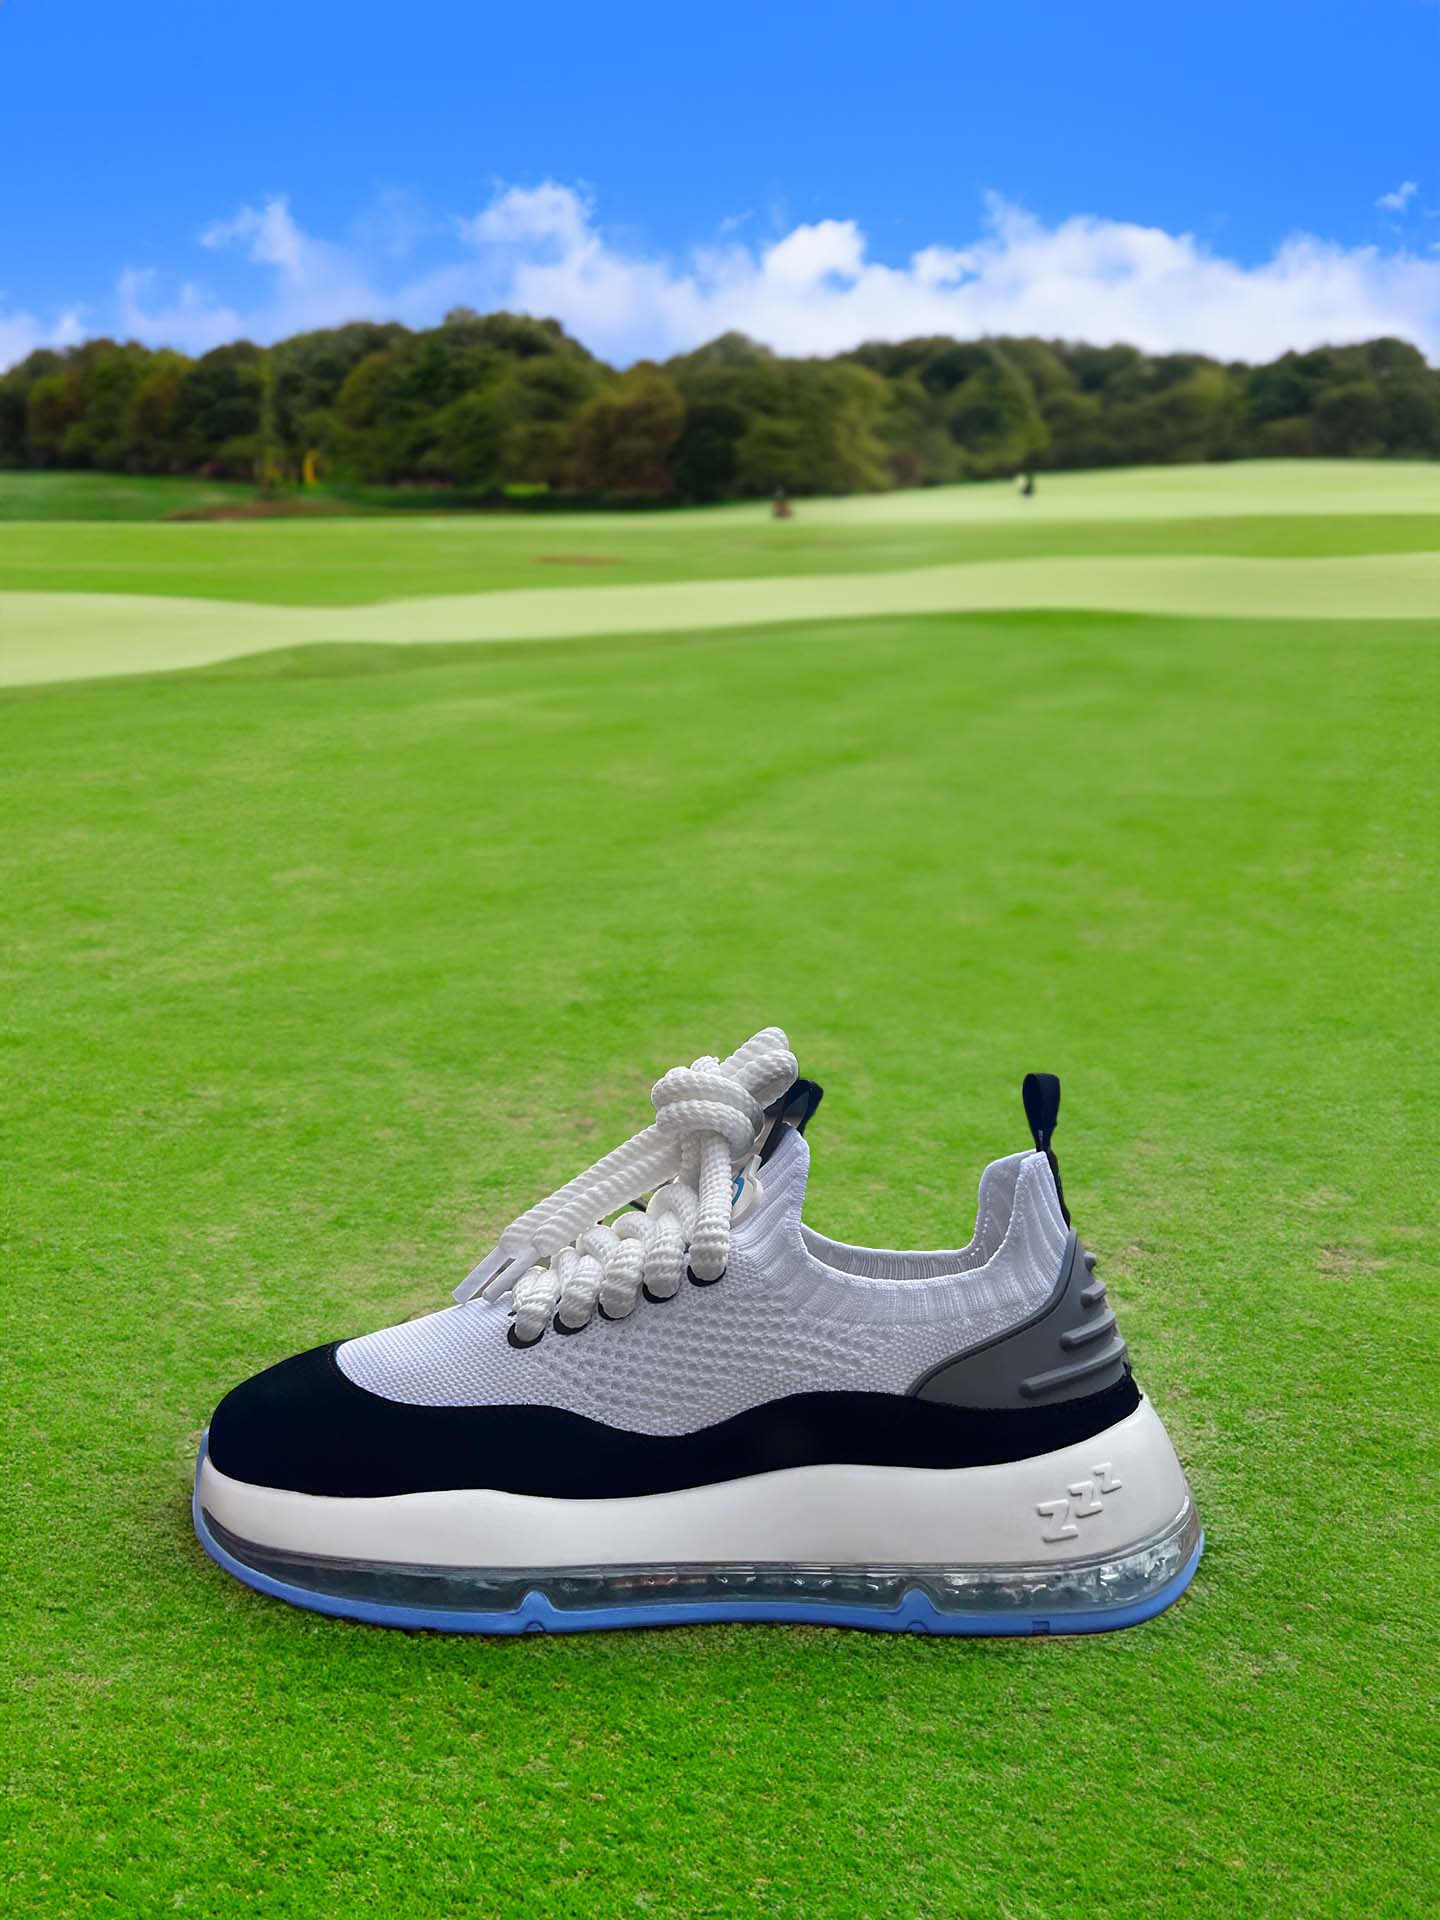 Image of shoe at the golf course